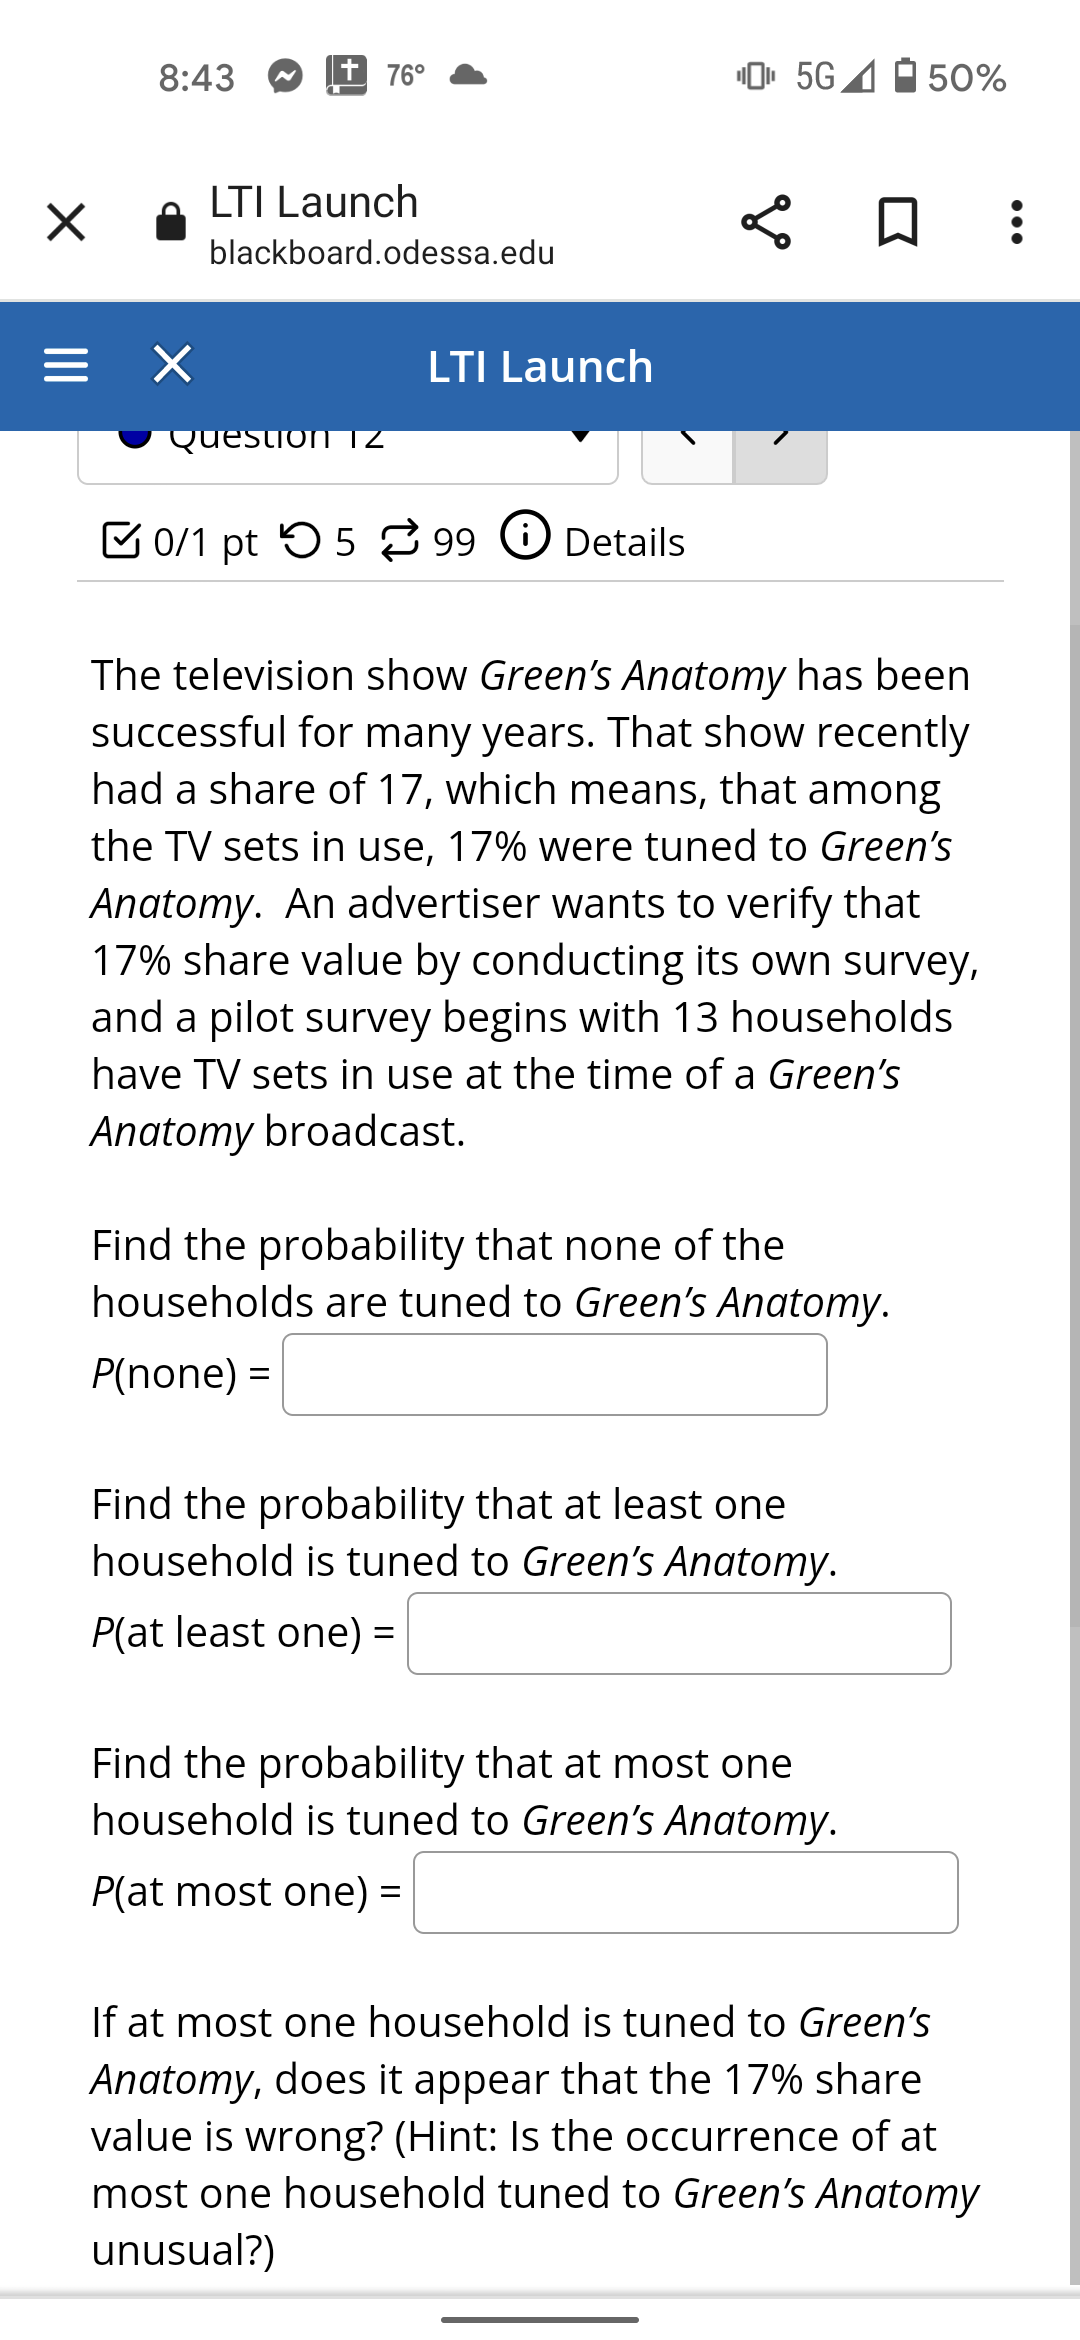 8:43
+ 76°
0. 5G4
50%
LTI Launch
blackboard.odessa.edu
= X
LTI Launch
Question TZ
C 0/1 pt 5 5 99 O Details
The television show Green's Anatomy has been
successful for many years. That show recently
had a share of 17, which means, that among
the TV sets in use, 17% were tuned to Green's
Anatomy. An advertiser wants to verify that
17% share value by conducting its own survey,
and a pilot survey begins with 13 households
have TV sets in use at the time of a Green's
Anatomy broadcast.
Find the probability that none of the
households are tuned to Green's Anatomy.
P(none) =
Find the probability that at least one
household is tuned to Green's Anatomy.
P(at least one) =
%3D
Find the probability that at most one
household is tuned to Green's Anatomy.
P(at most one) =
If at most one household is tuned to Green's
Anatomy, does it appear that the 17% share
value is wrong? (Hint: Is the occurrence of at
most one household tuned to Green's Anatomy
unusual?)
